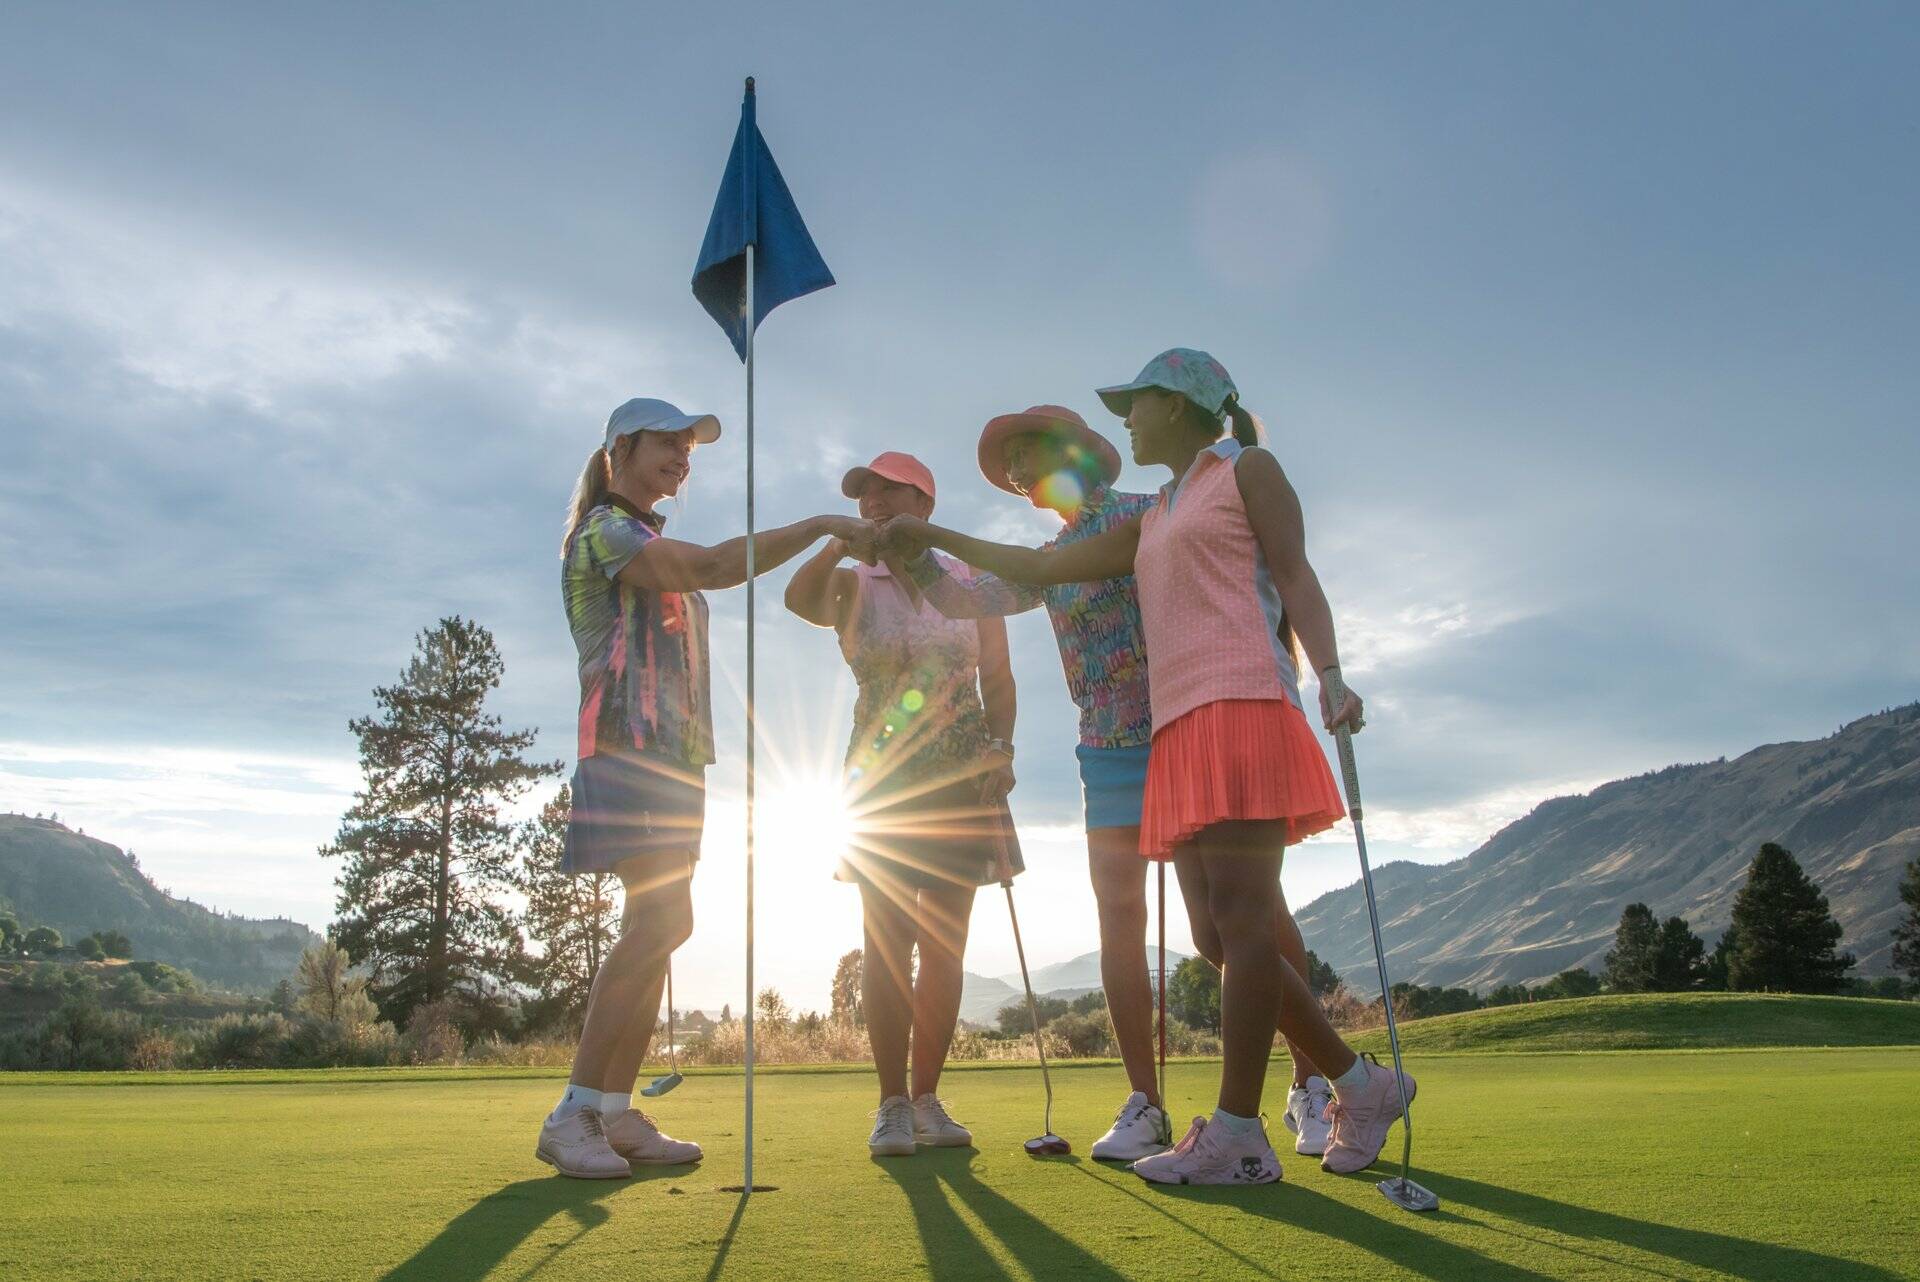 Rivershore Estate & Golf Links. With eight courses to choose from, Kamloops tees up plenty of fun for golfers of all levels. Golf Kamloops/Mary Putnam